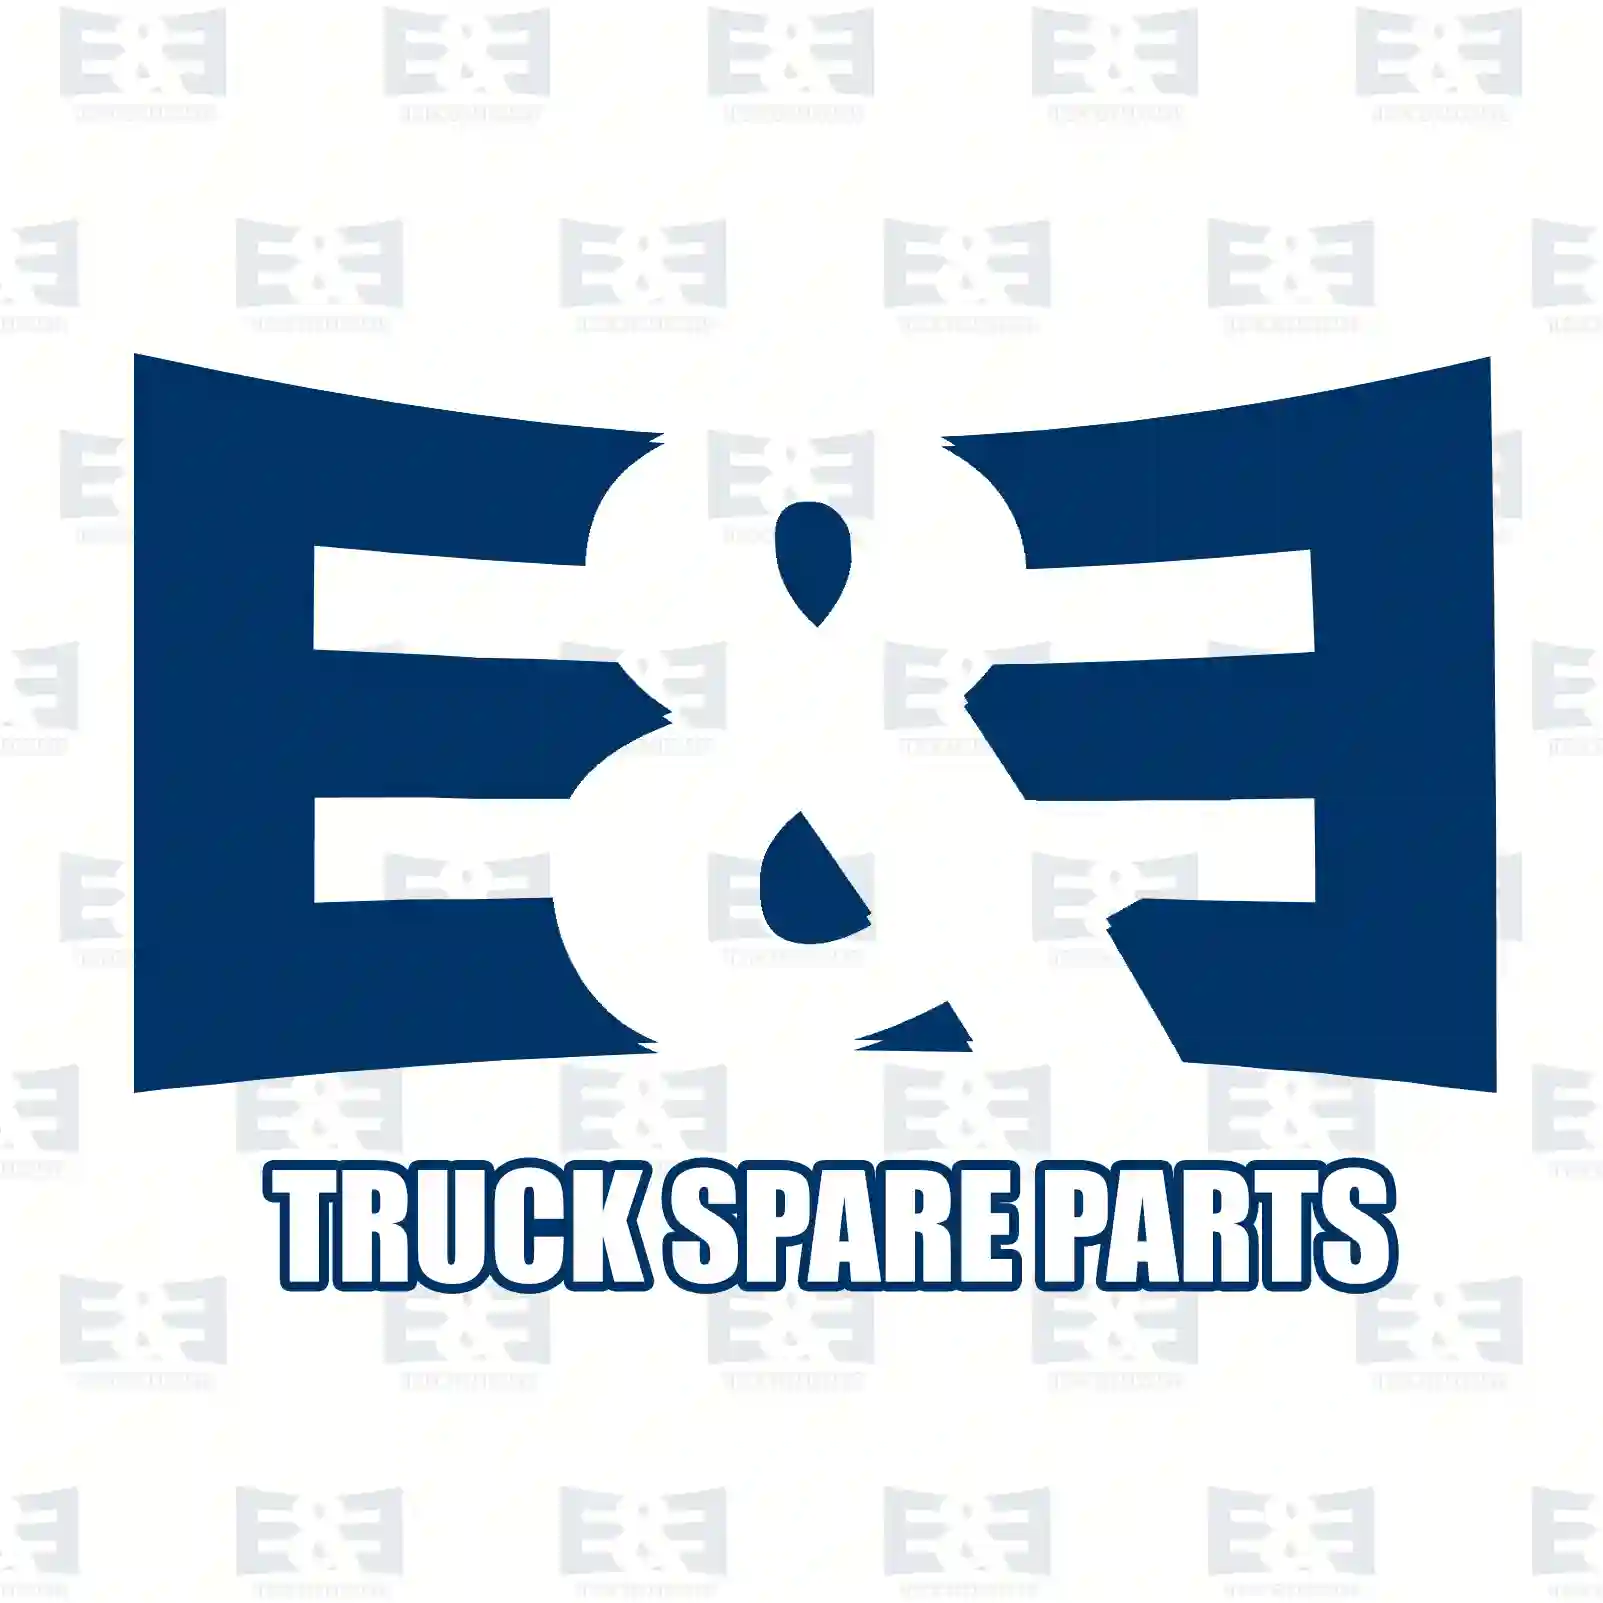 Bearing, top strut mounting, 2E2283431, 2N0412249A ||  2E2283431 E&E Truck Spare Parts | Truck Spare Parts, Auotomotive Spare Parts Bearing, top strut mounting, 2E2283431, 2N0412249A ||  2E2283431 E&E Truck Spare Parts | Truck Spare Parts, Auotomotive Spare Parts